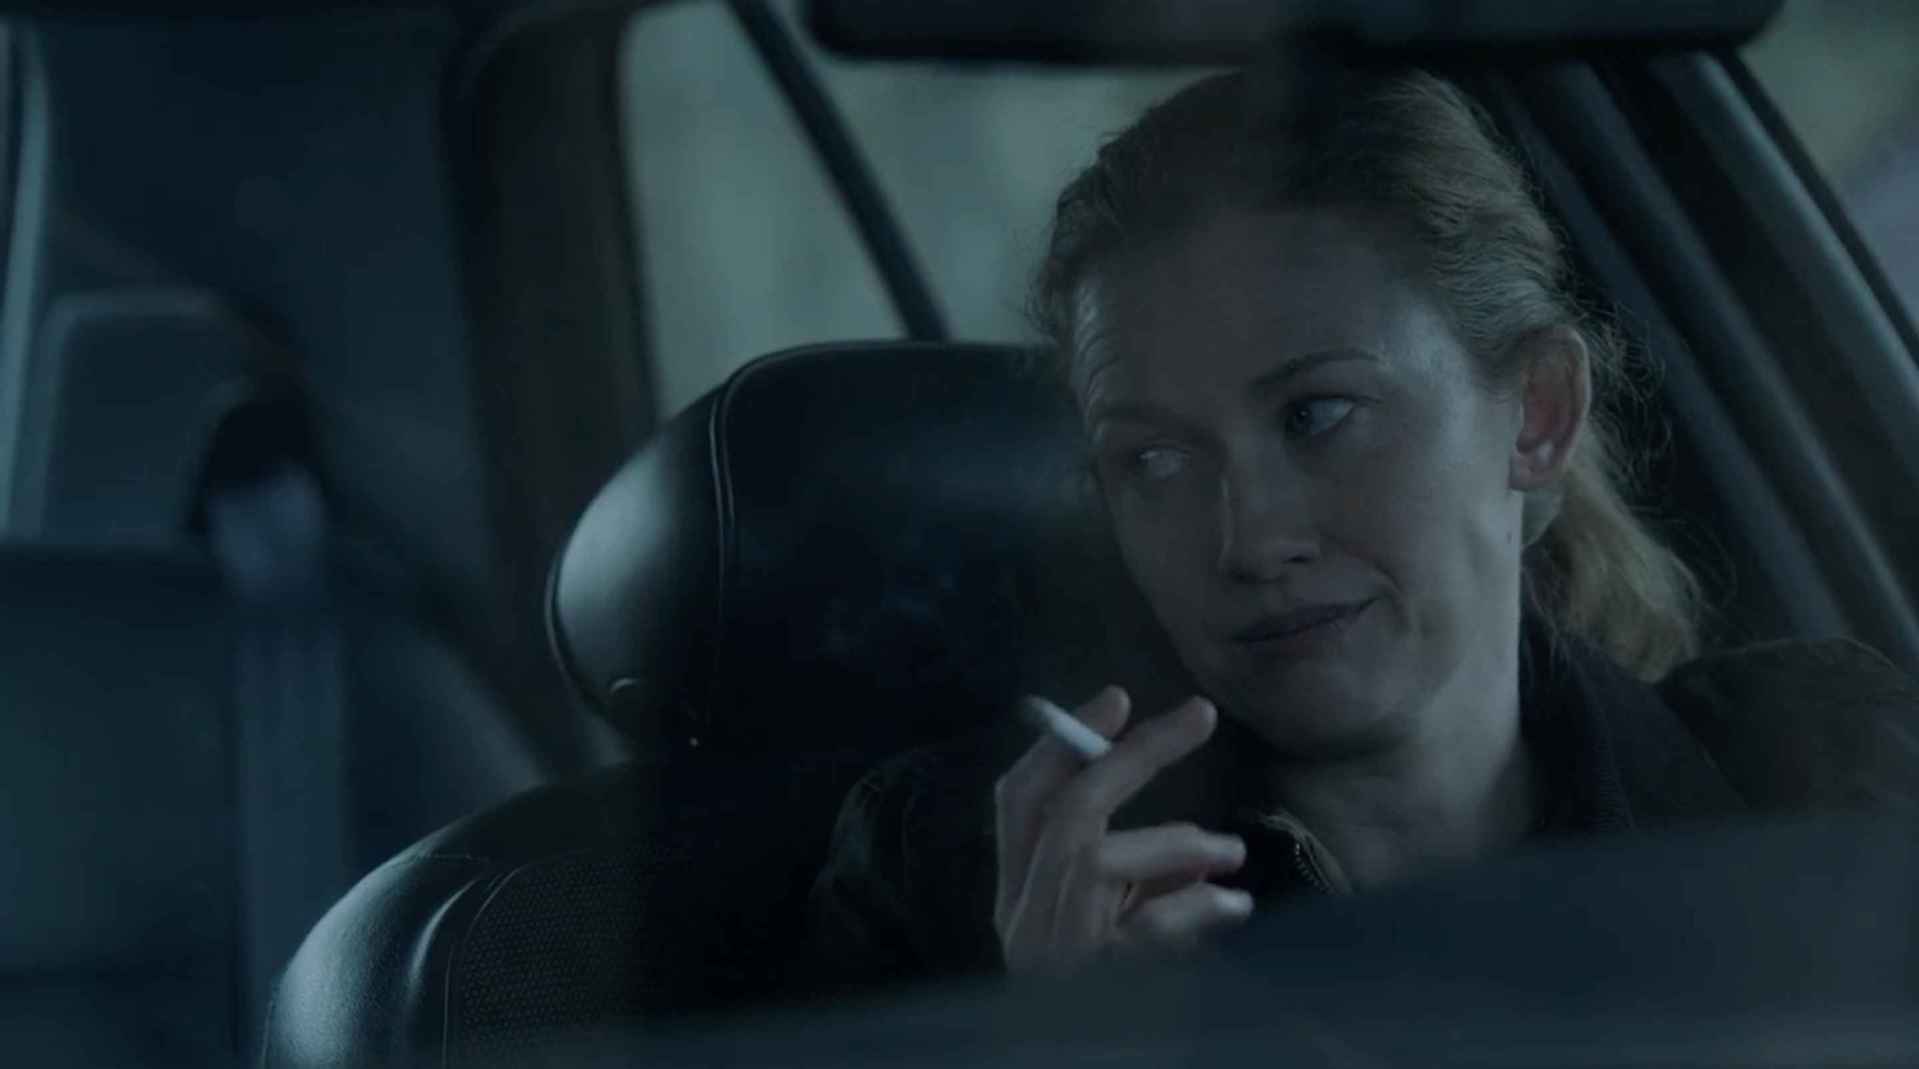 The Killing - Sarah smoking a cigarette in a car